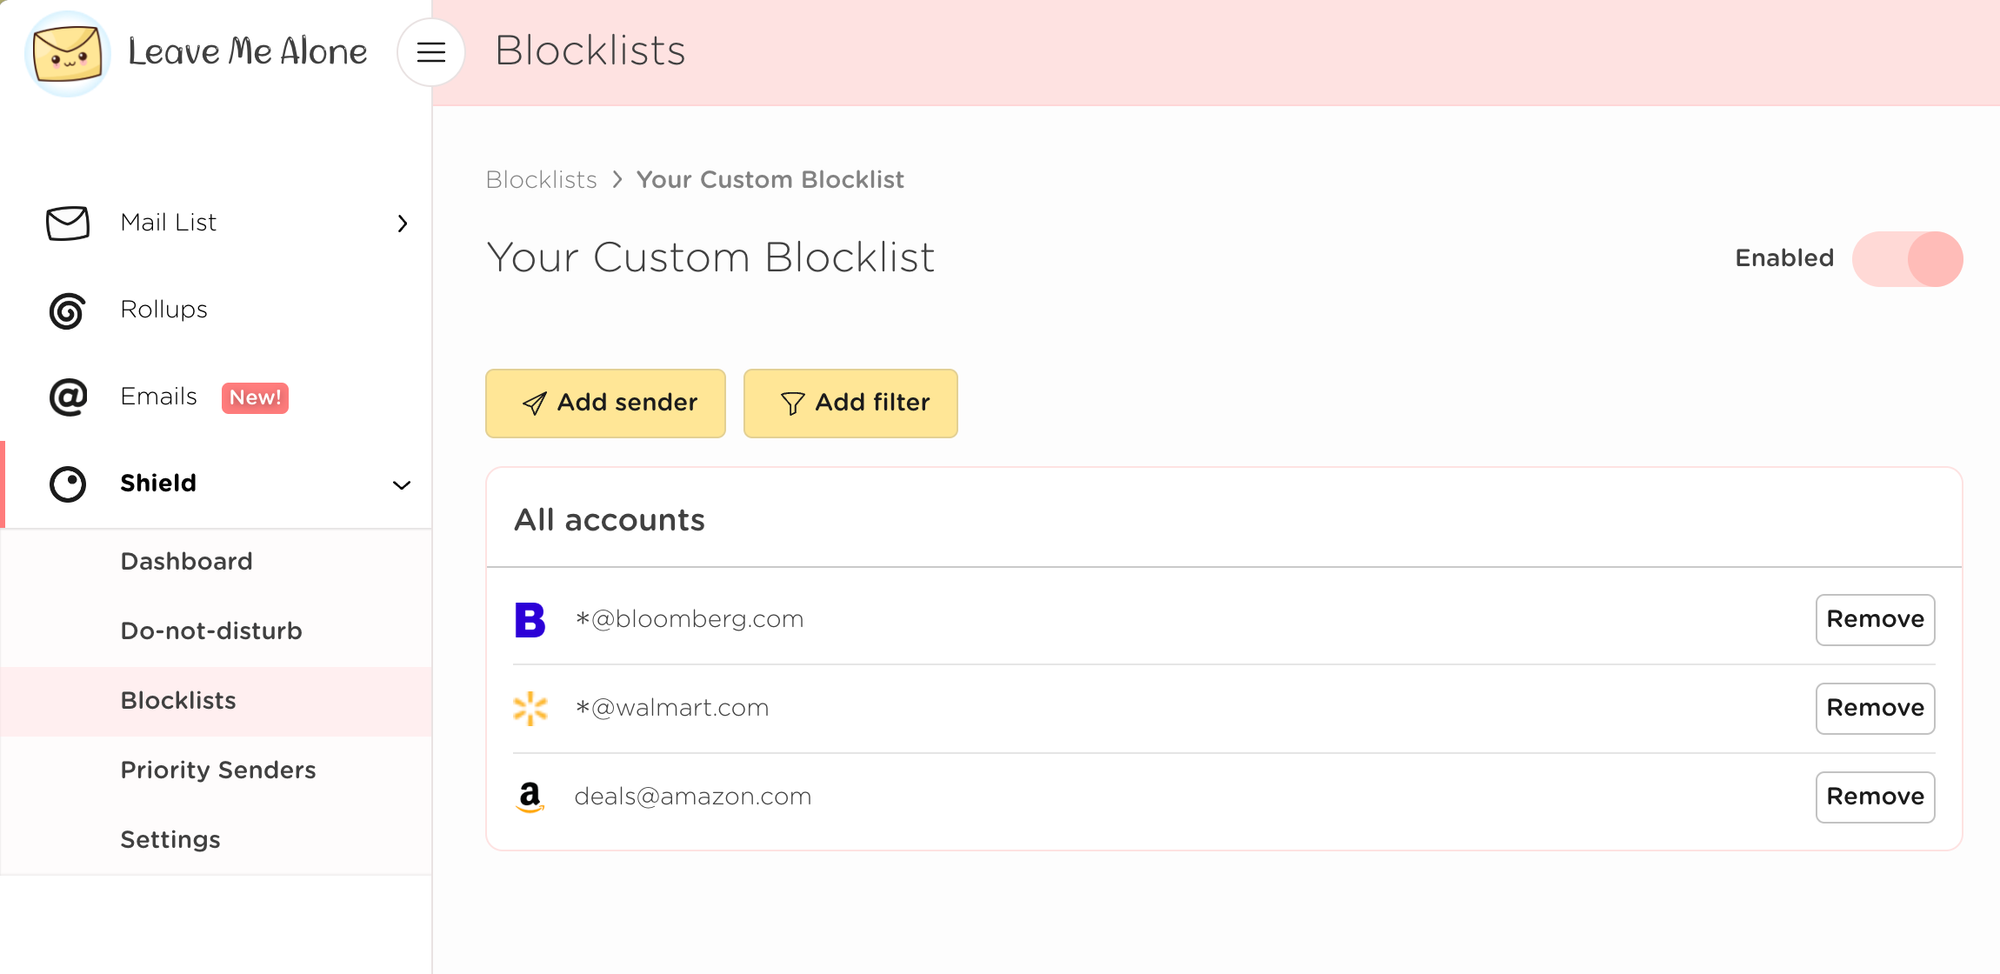 An example of the custom blocklist with domains and email addresses blocked.